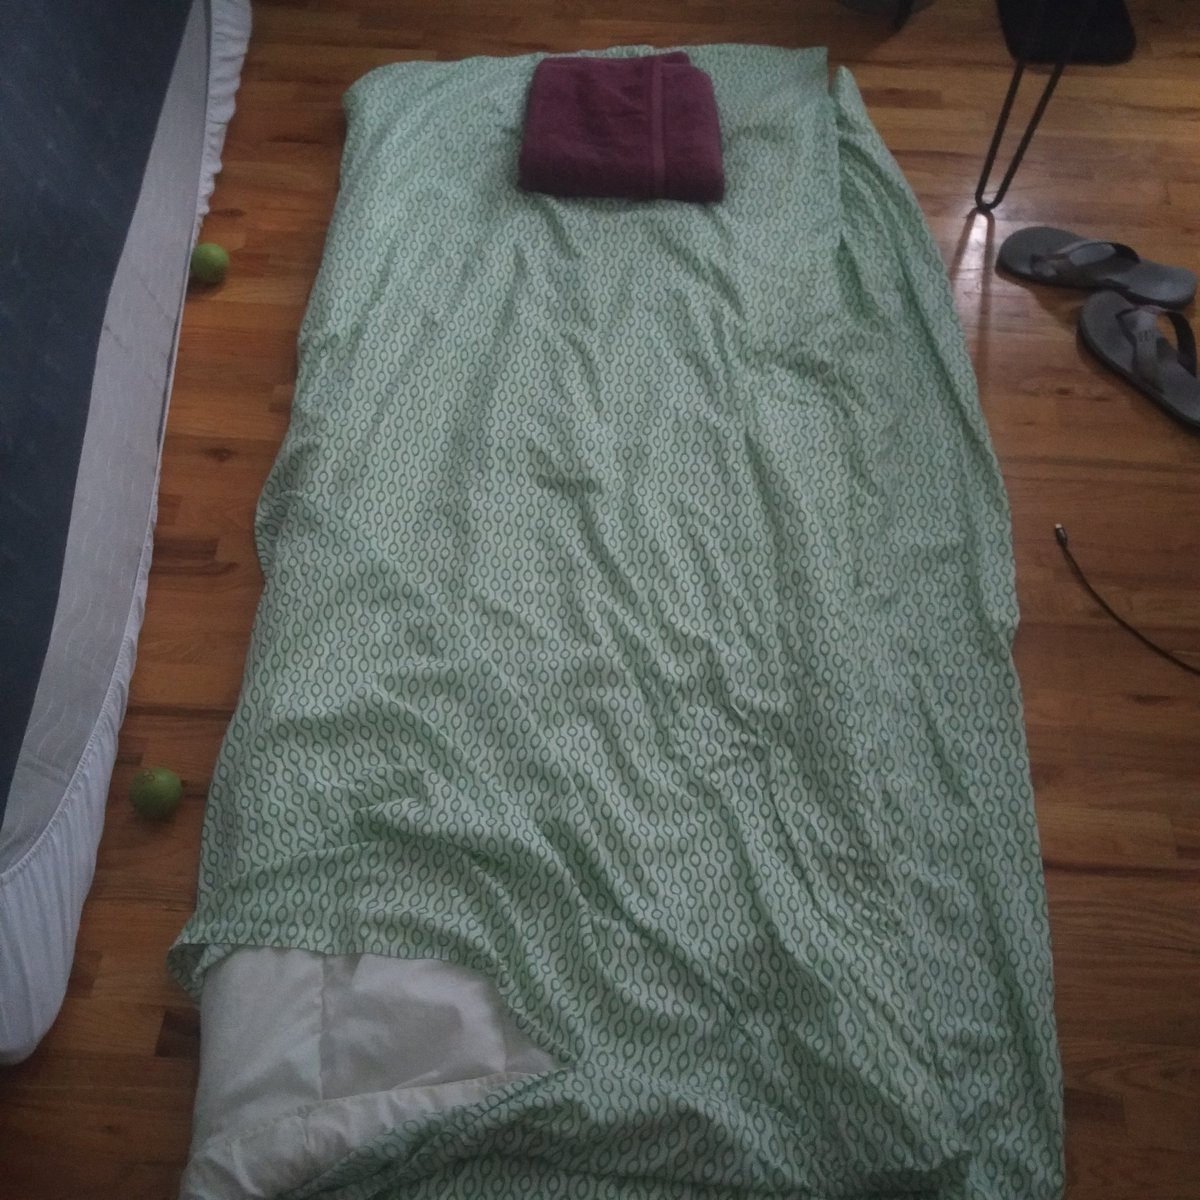 night 4: first no mattress night! slept from 12-7am, then went to go sleep on the couch 7-9:30got soooome sleep, there wasn't acute discomfort, but there was a clear sense of not being able to completely relax into the ground